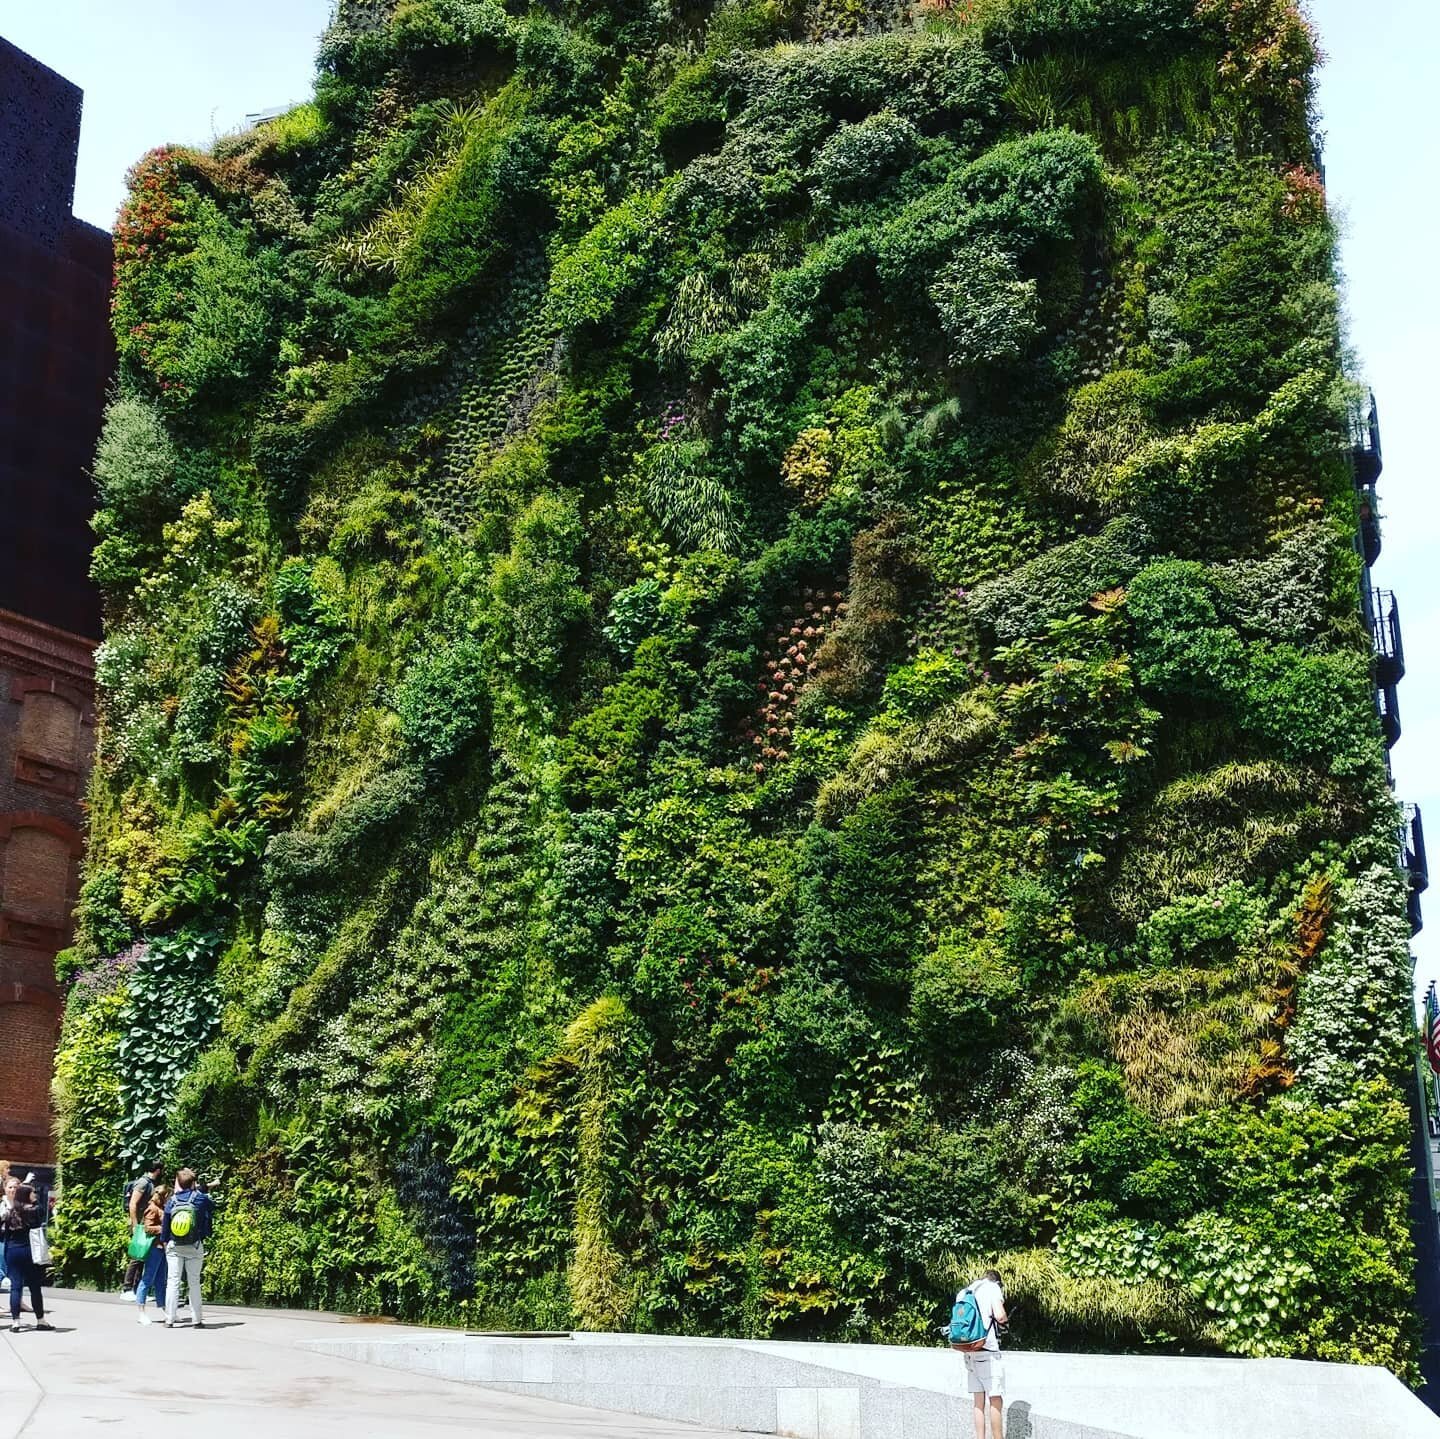 The #caixaforum in #madridspain has a #verticalgarden on one of its exterior walls. Vertical gardens help increase greenspace while reducing the #heatislandeffect in cities. In order to save on weight on the wall assemblies, some vertical gardens red